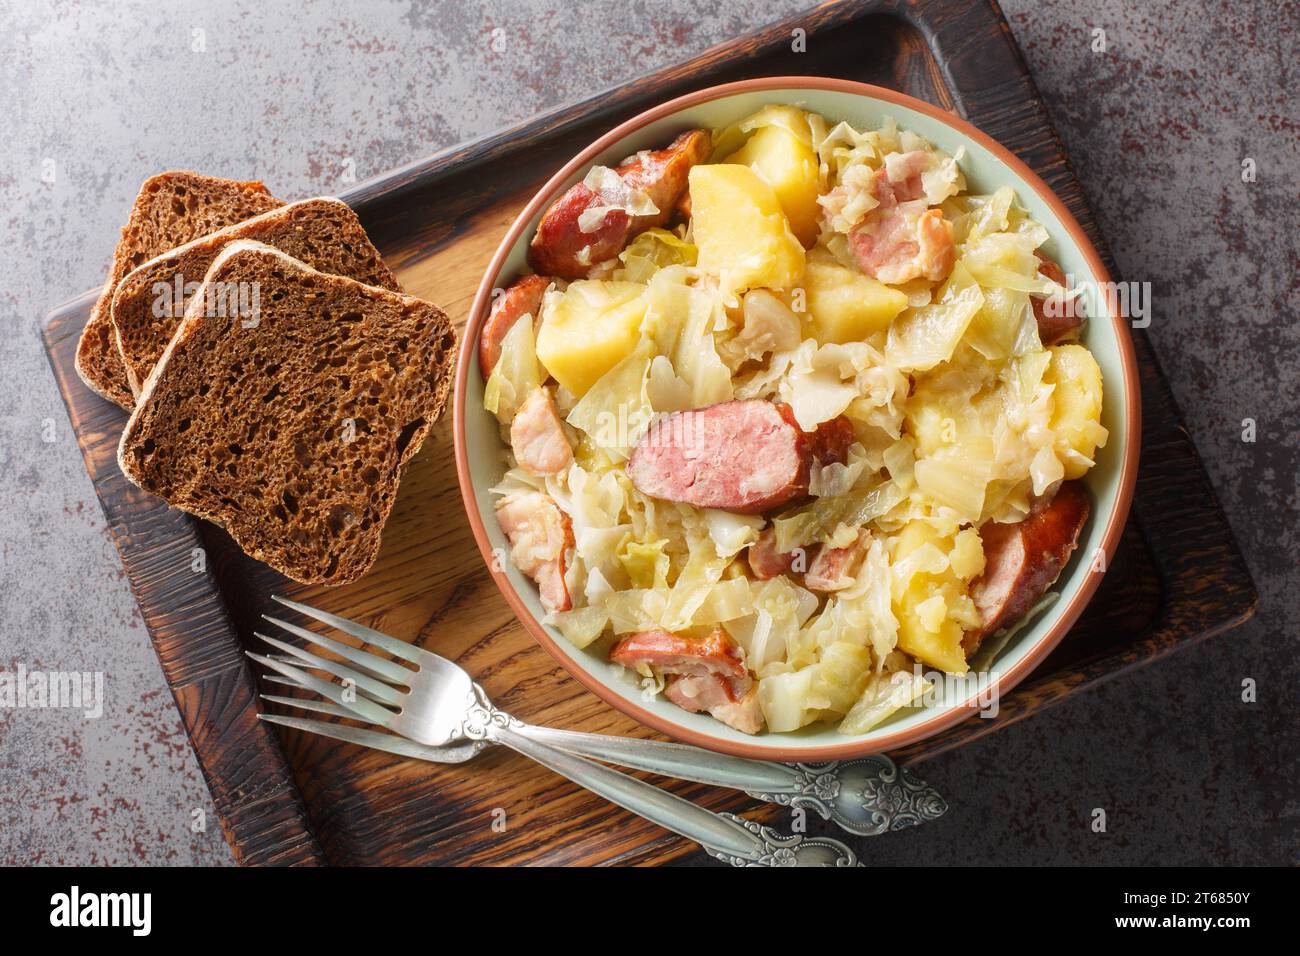 Cabbage stewed with potatoes, sausage, bacon and onions close-up in a bowl on the table. Horizontal top view from above Stock Photo